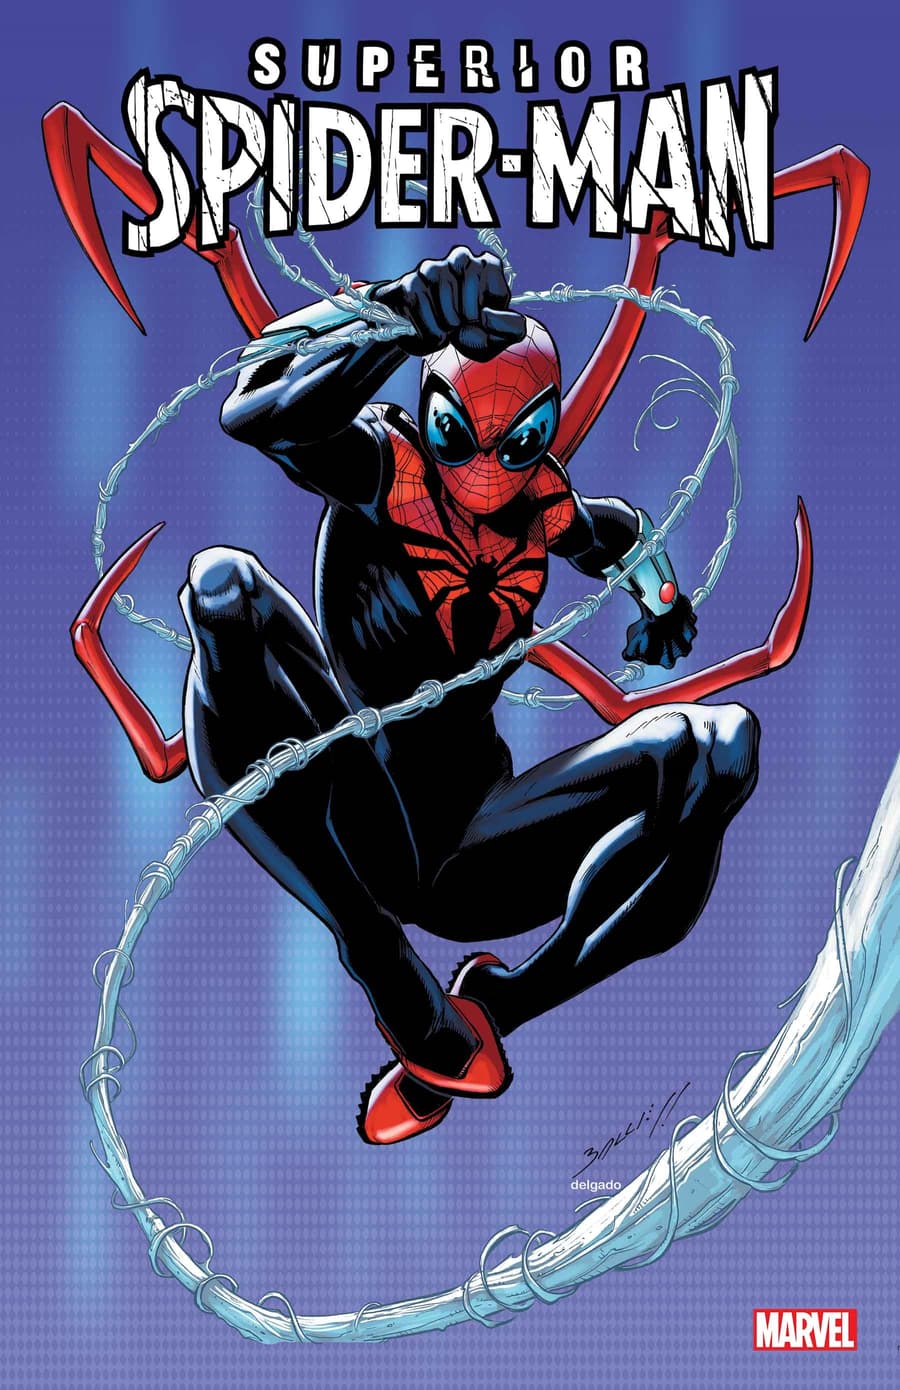 Cover to SUPERIOR SPIDER-MAN (2023) #1 by Mark Bagley.